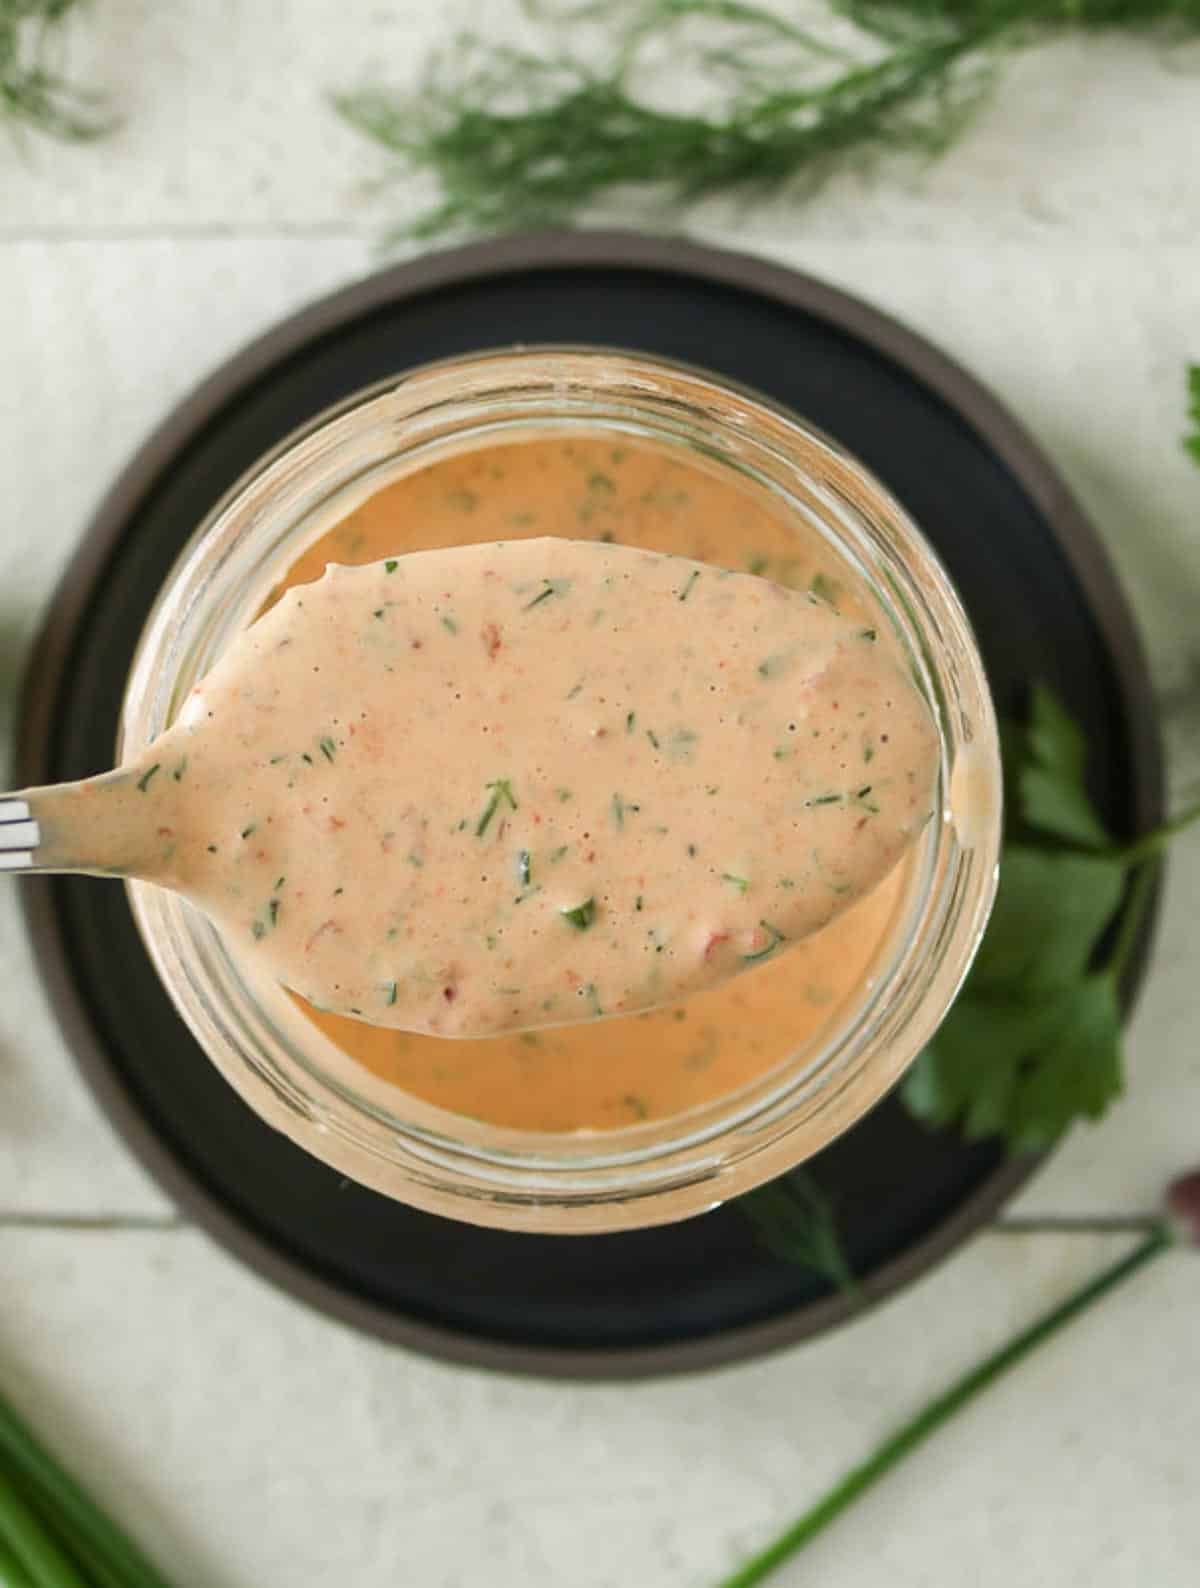 Spoonful of chipotle ranch dressing from a jar.